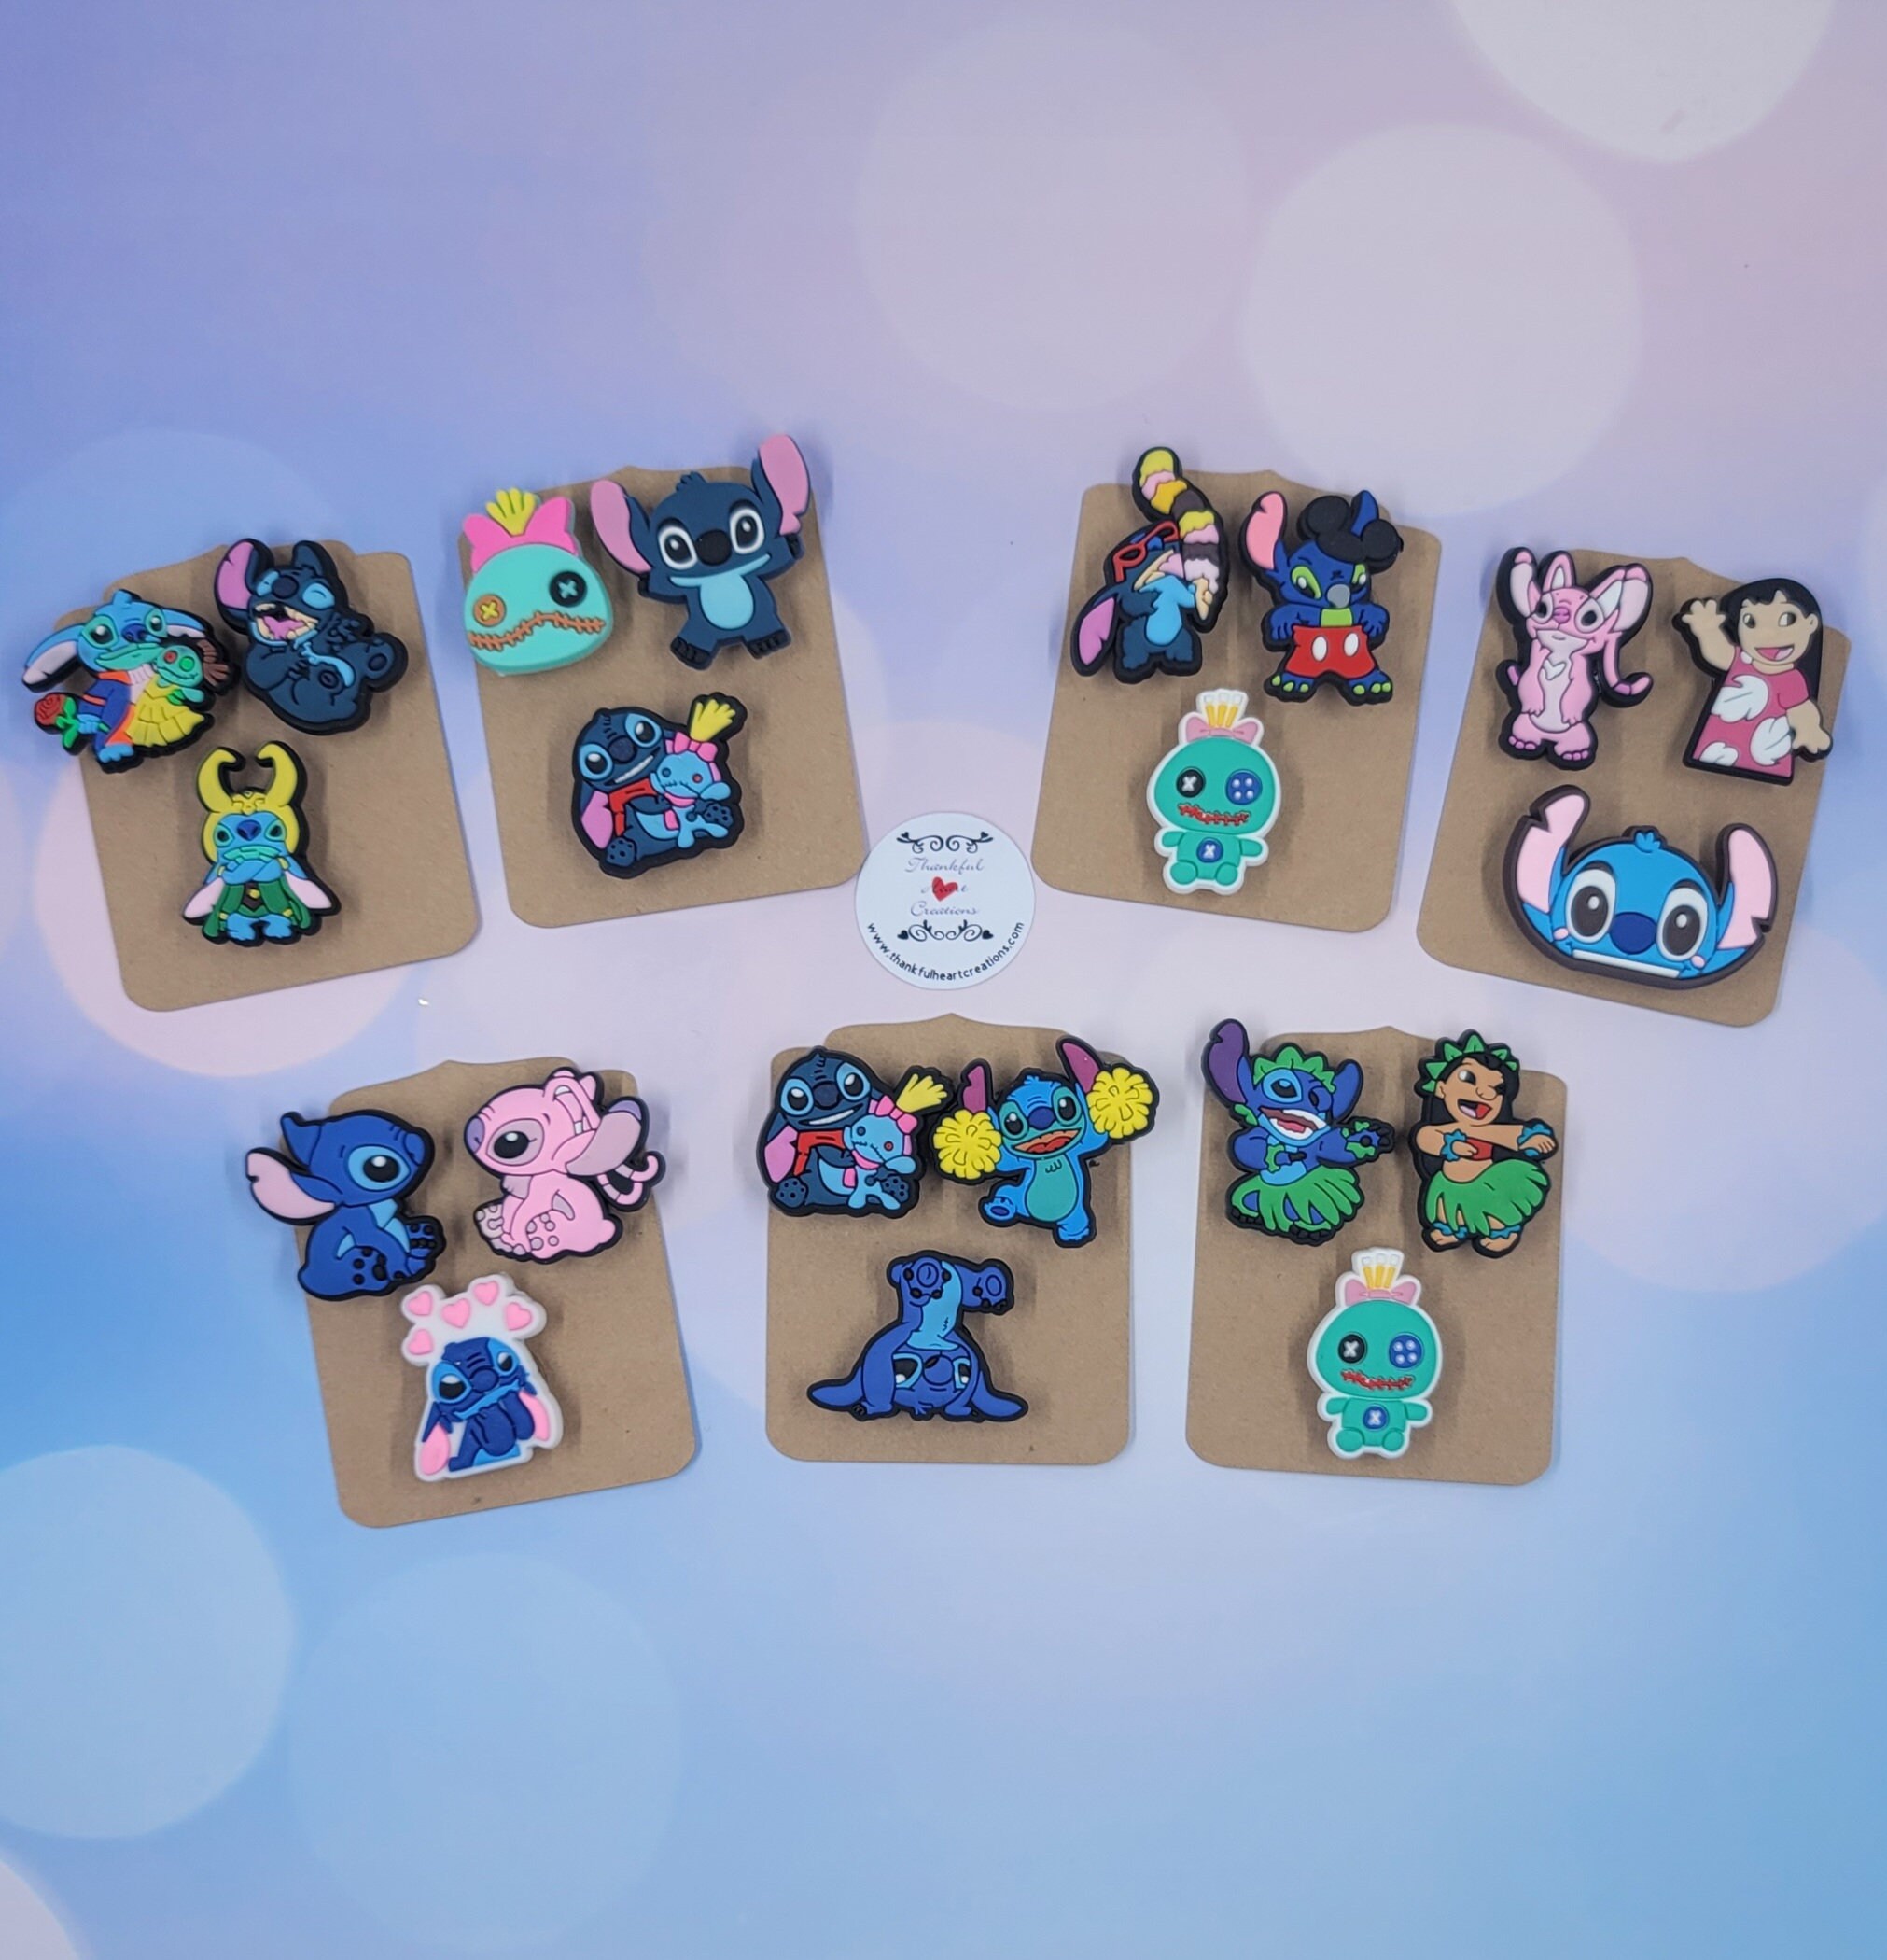 Stitch croc charms available now! #fyp #liloandstitch #liloystich